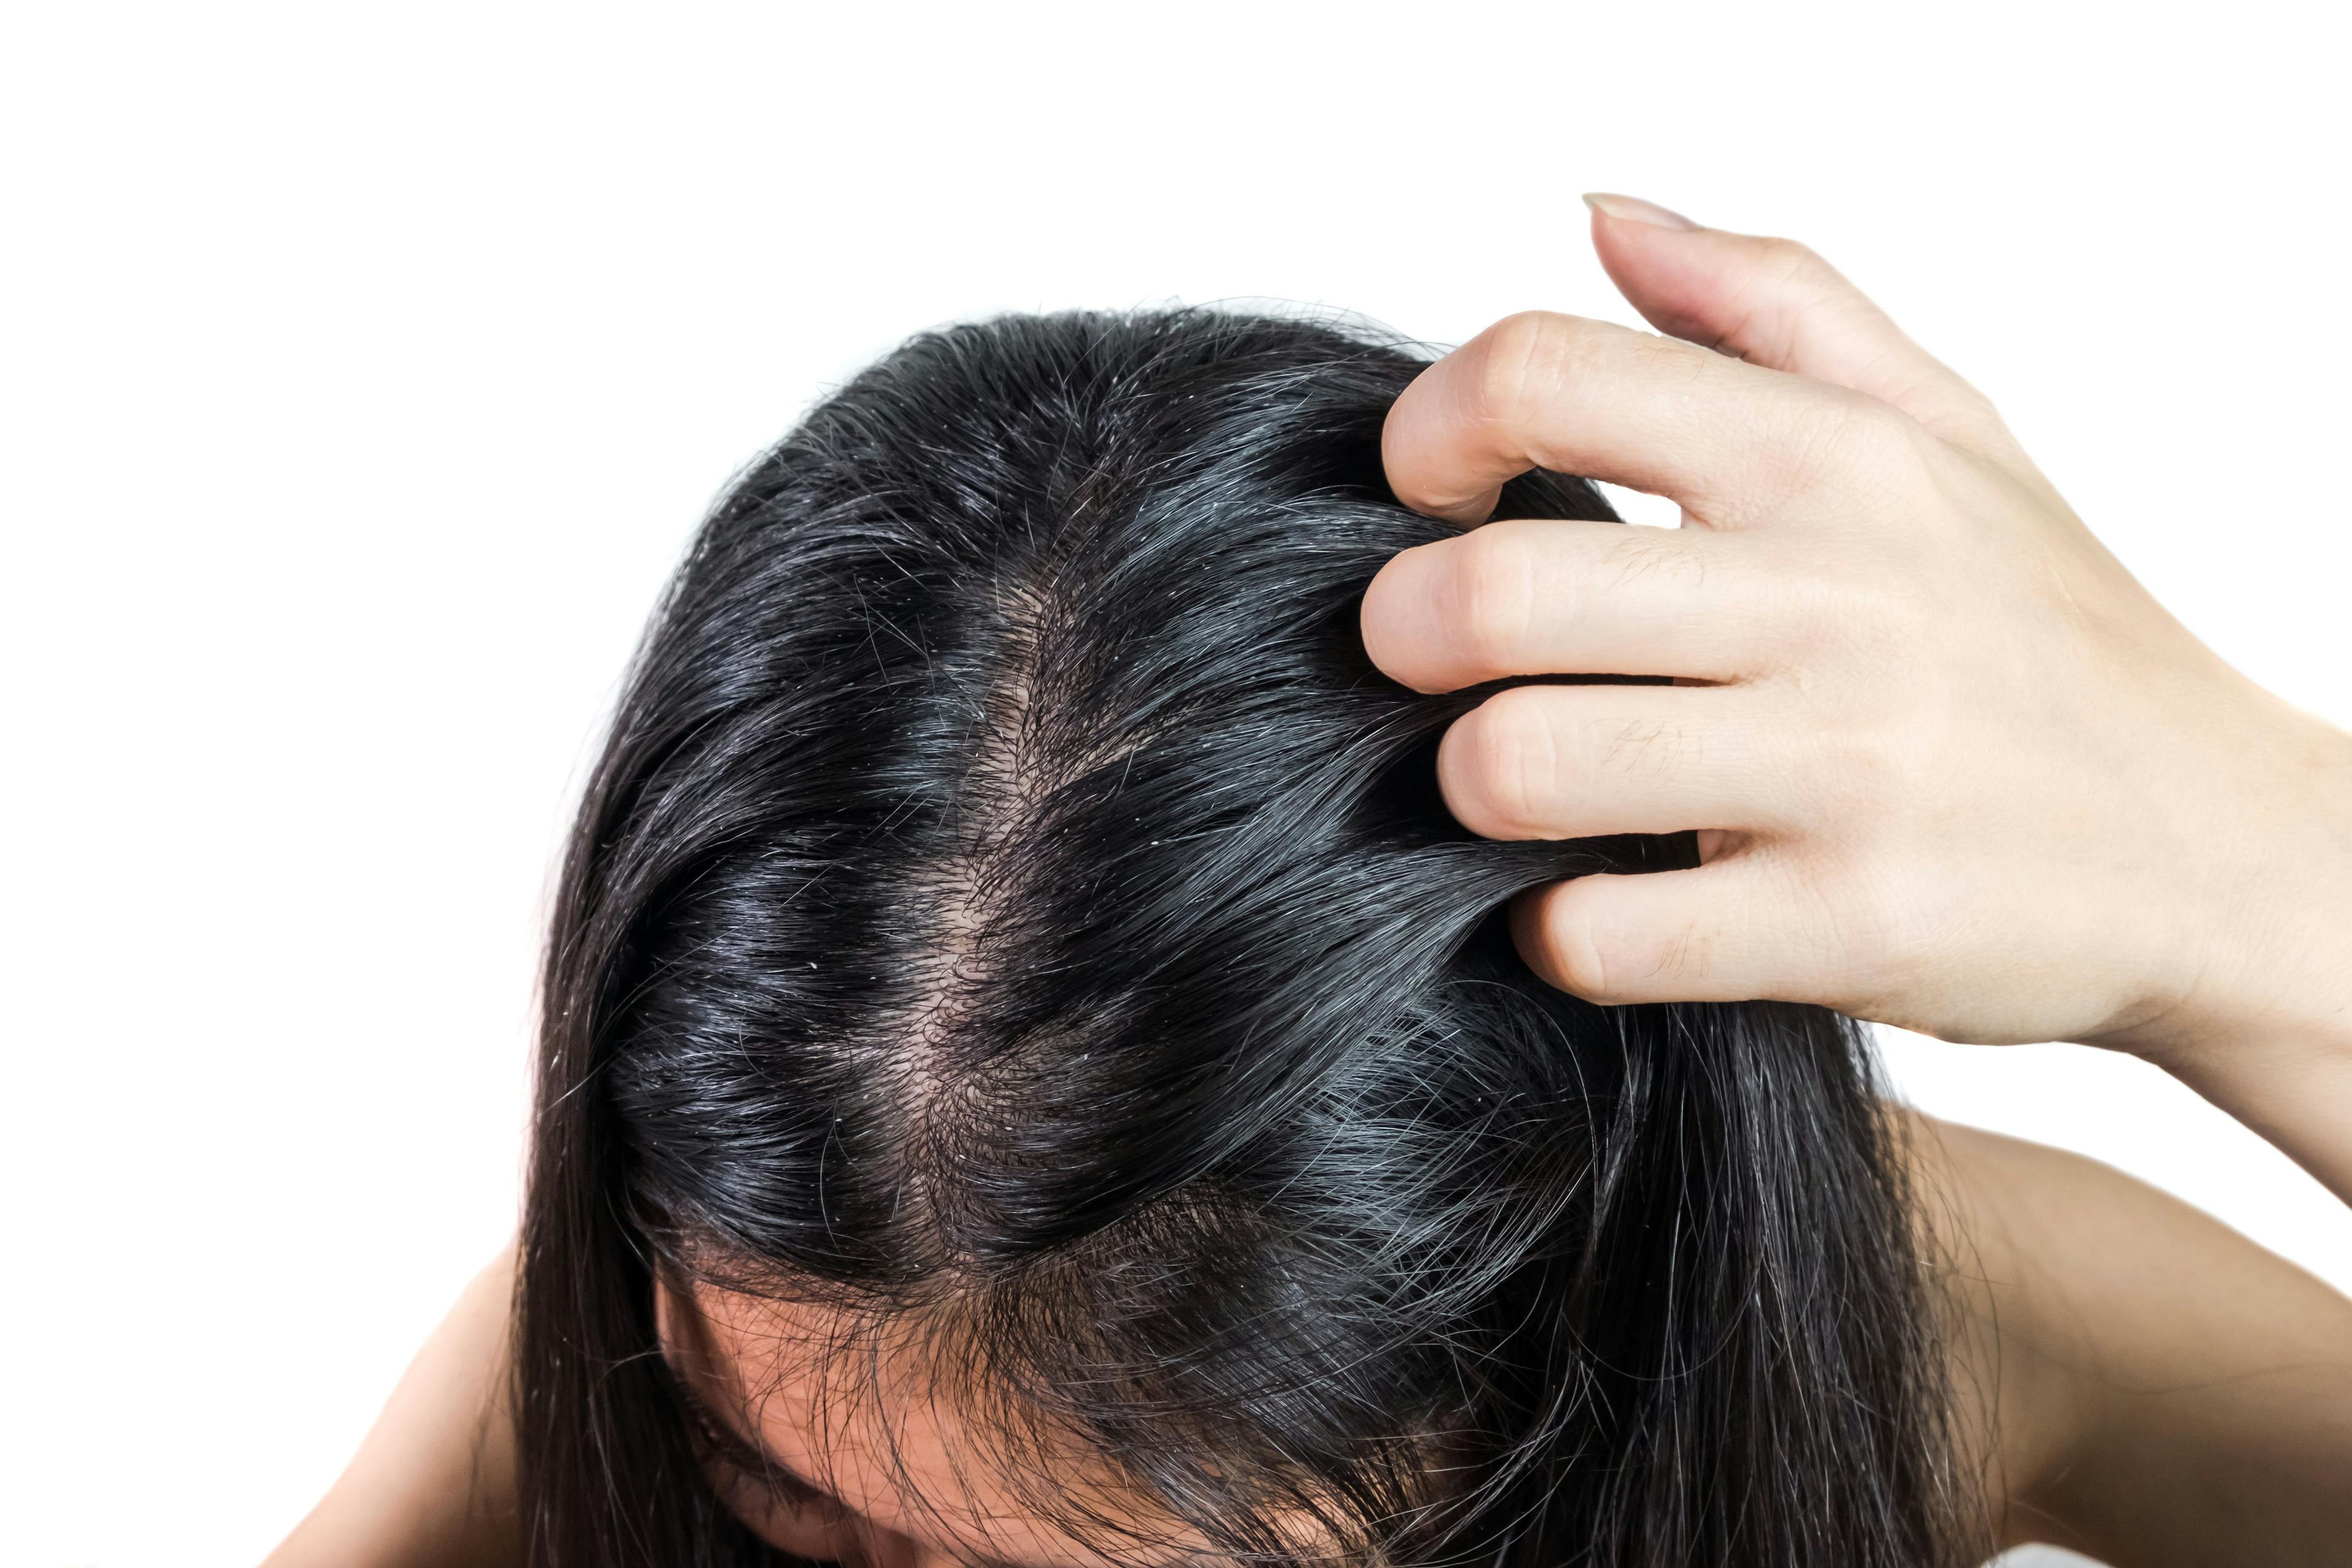 Woman with scalp itch | Small fish - stock.adobe.com